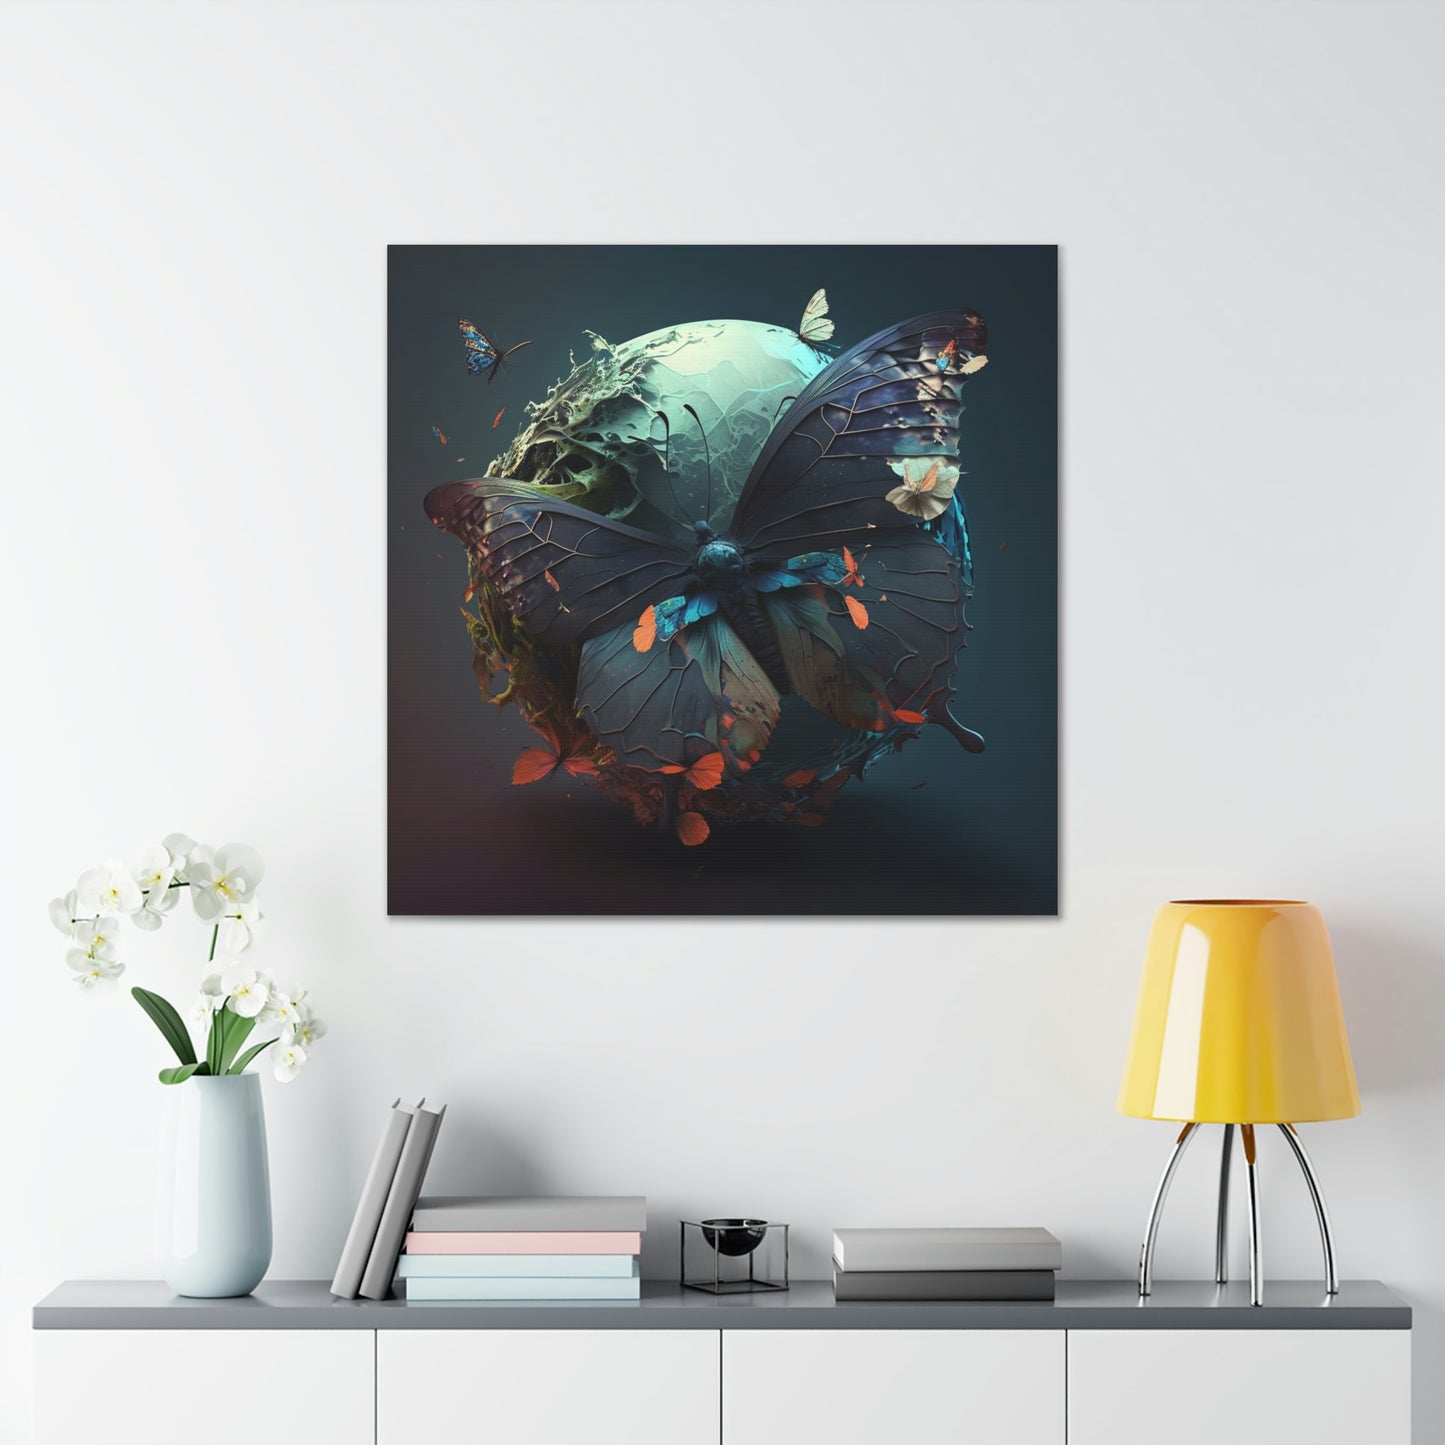 Abstract butterfly planet